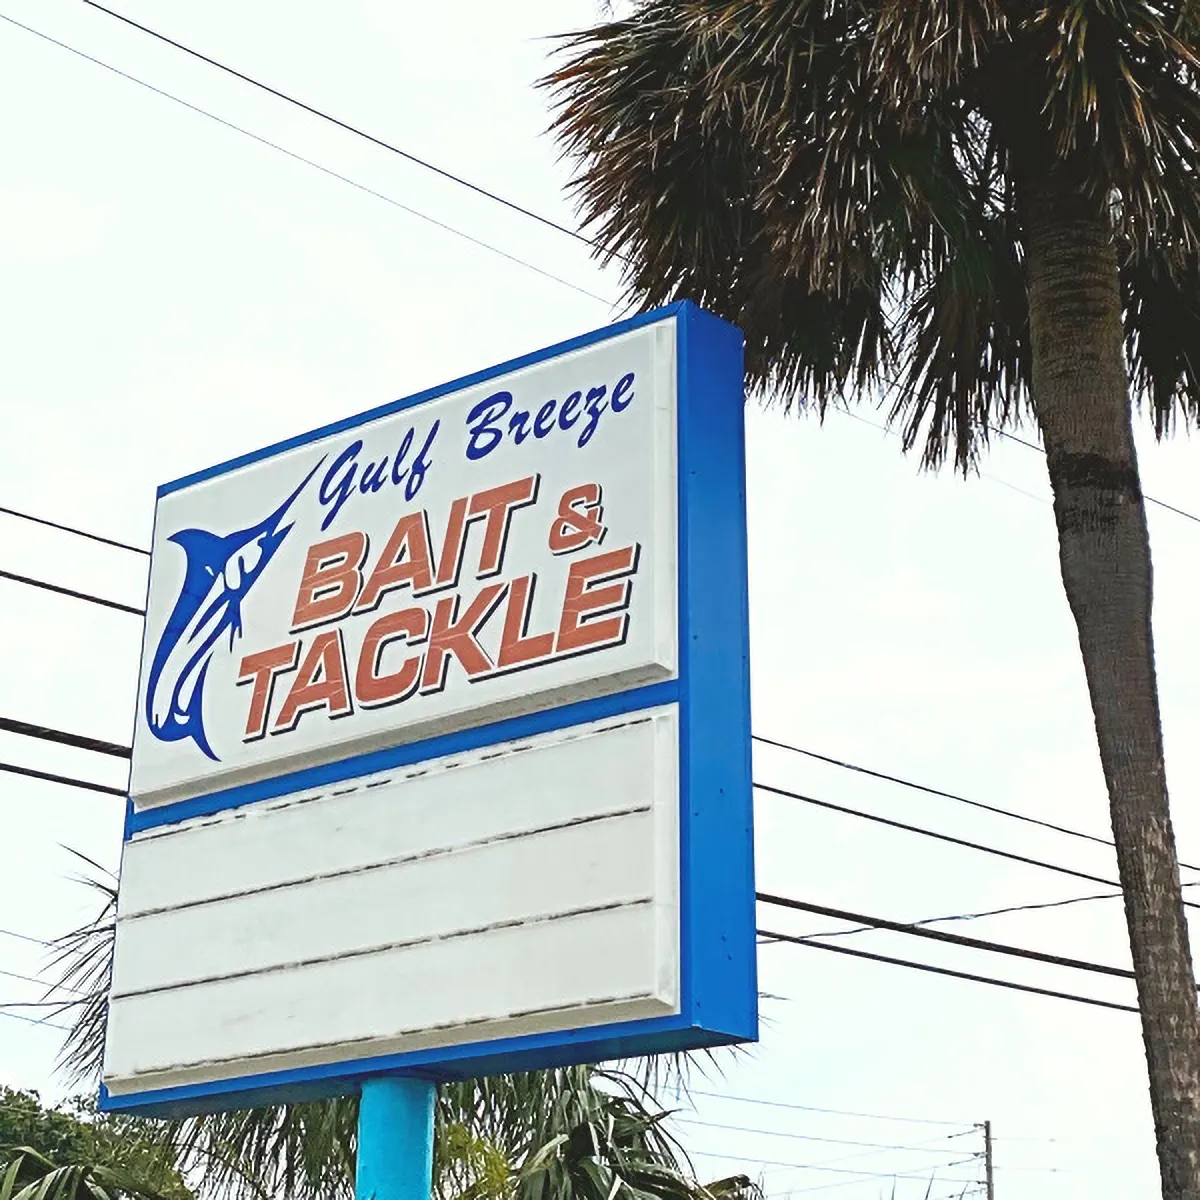 Bait and Tackle Sign Bridge Over Water | Furnace Repair in Gulf Breeze | Emerald Coast Air Conditioning and Heating | AirConditioningRepairPensacola.com